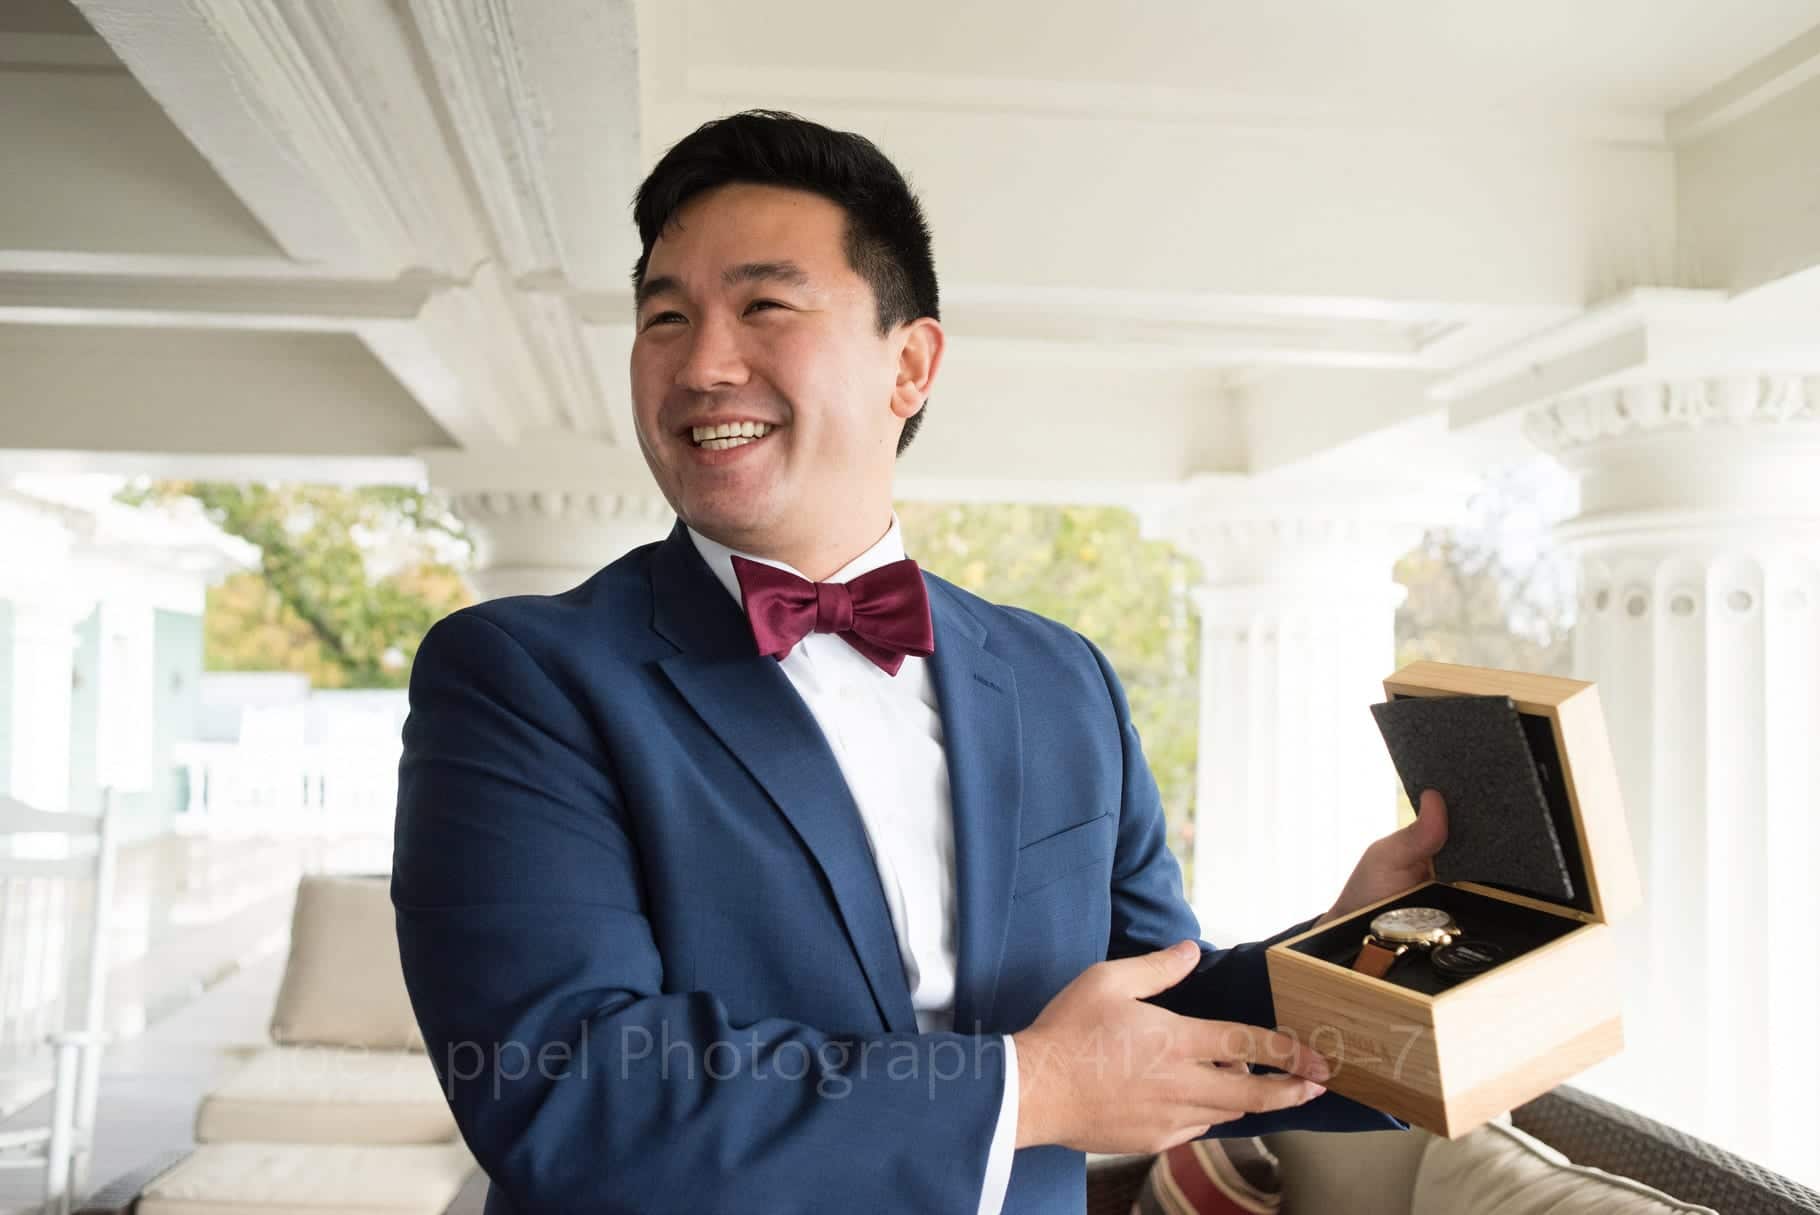 A groom wearing a blue suit and a pink bow tie smiles as he shows a box with a watch from Shinola that his bride gave him